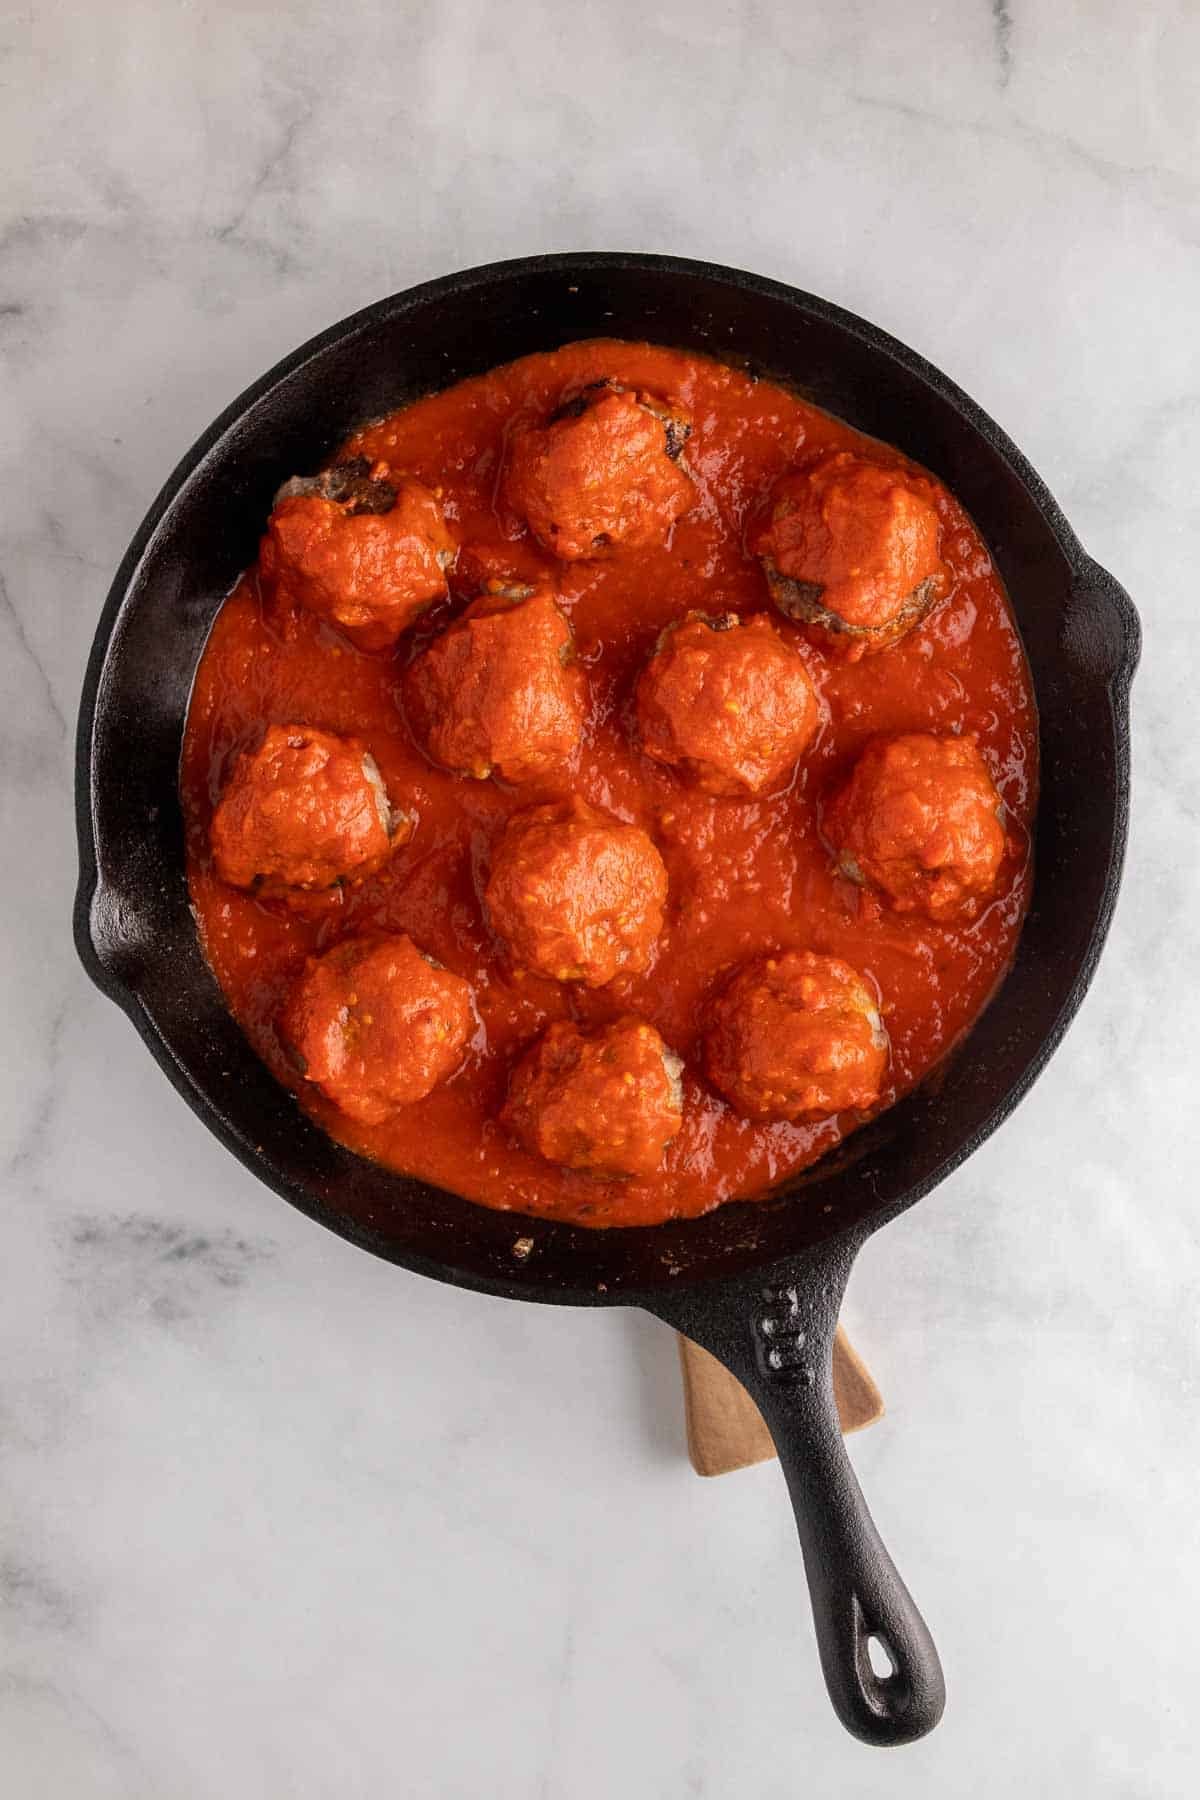 Meatballs in skillet with marinara sauce, as seen from above